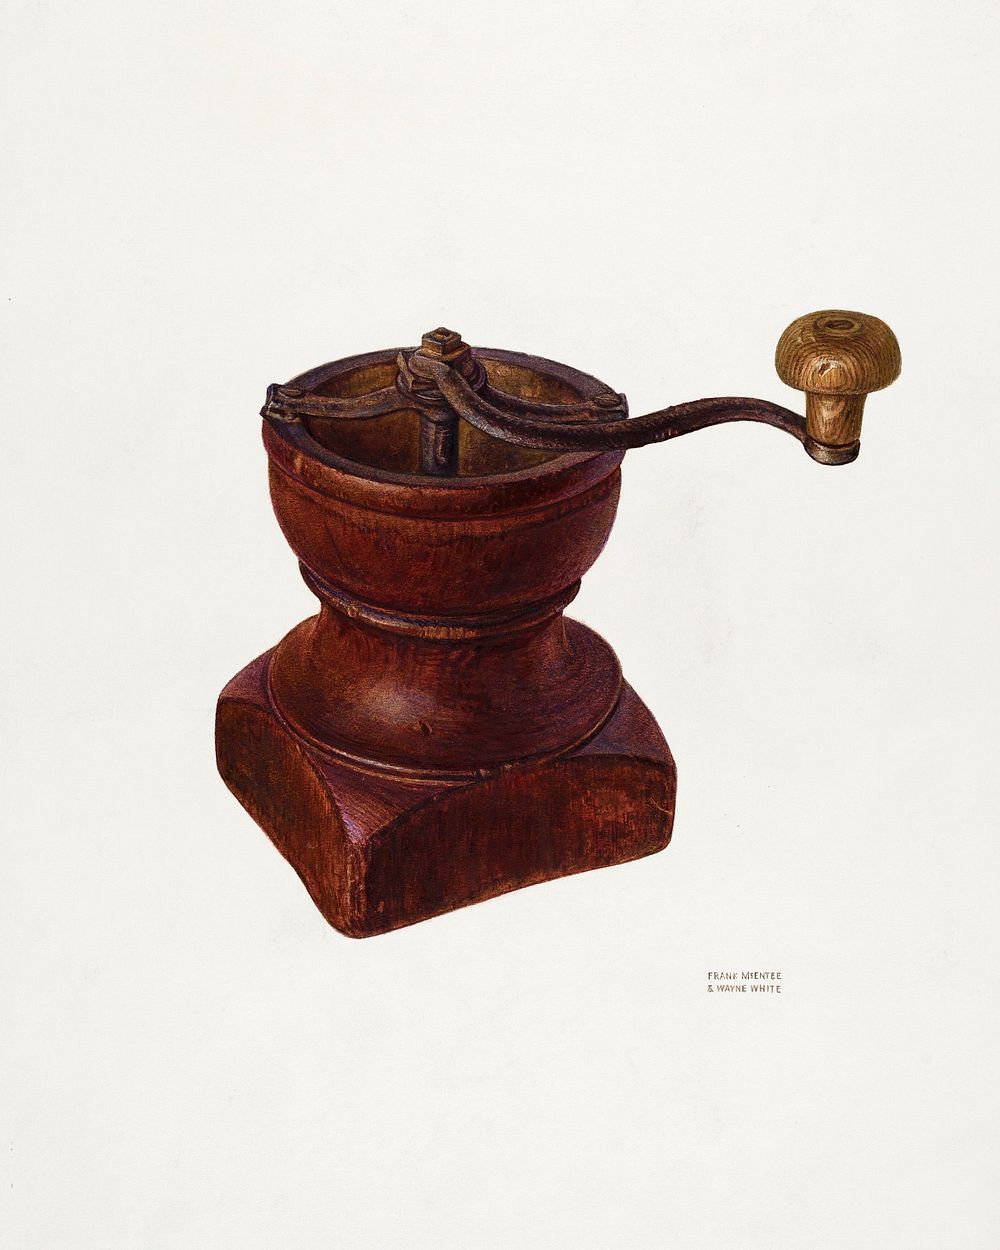 Coffee Grinder (ca. 1940) by Frank McEntee & Wayne White. Original from The National Gallery of Art. Digitally enhanced by…